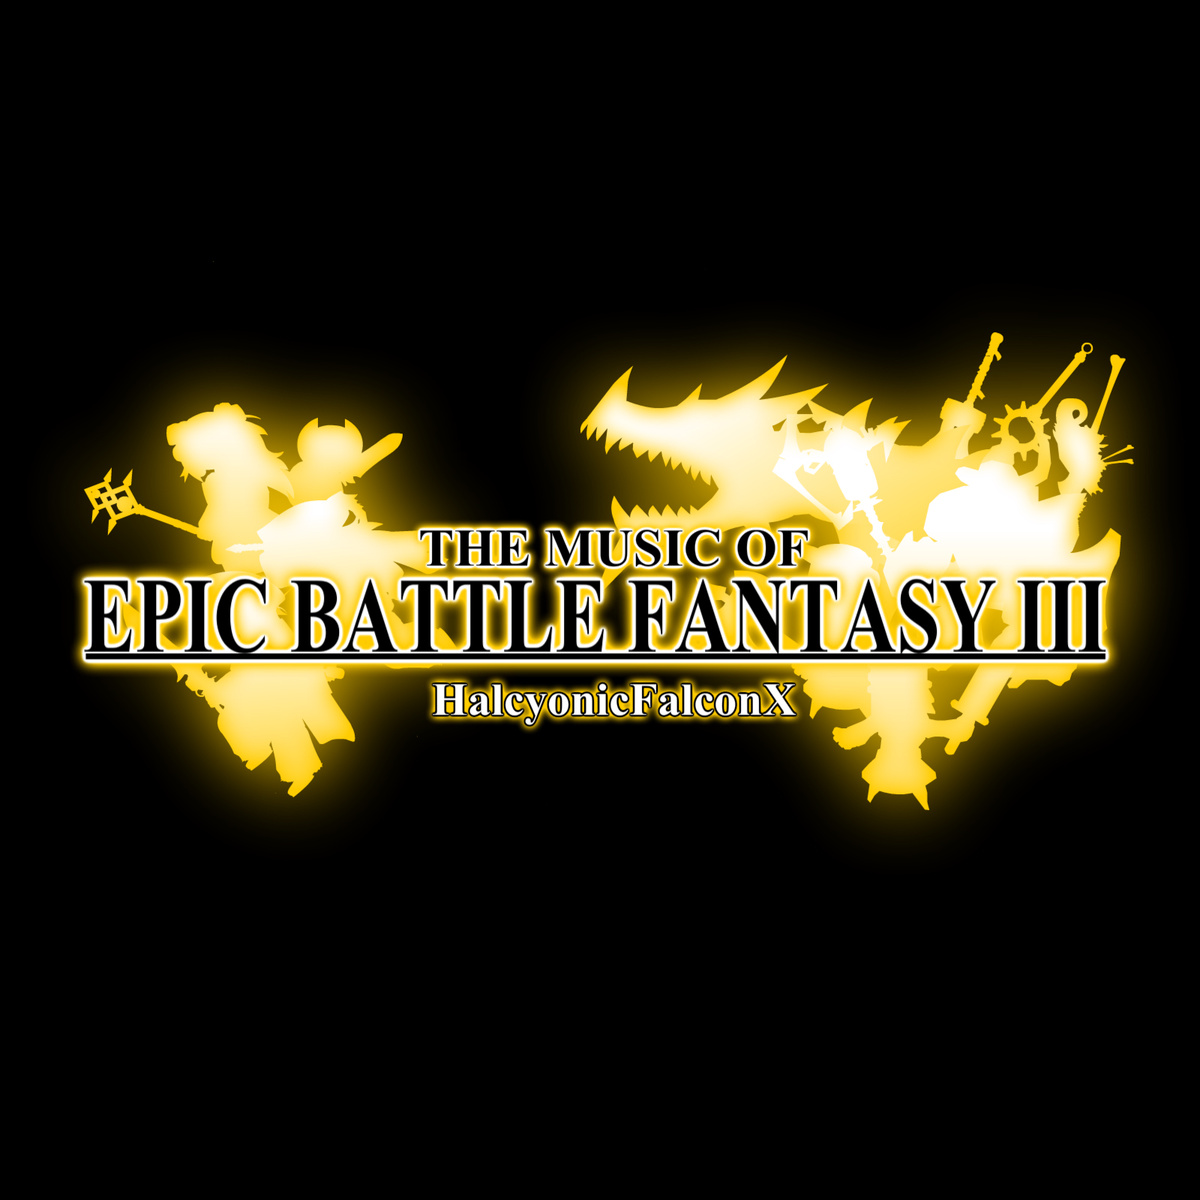 the-music-of-epic-battle-fantasy-3-epic-battle-fantasy-wiki-fandom-powered-by-wikia